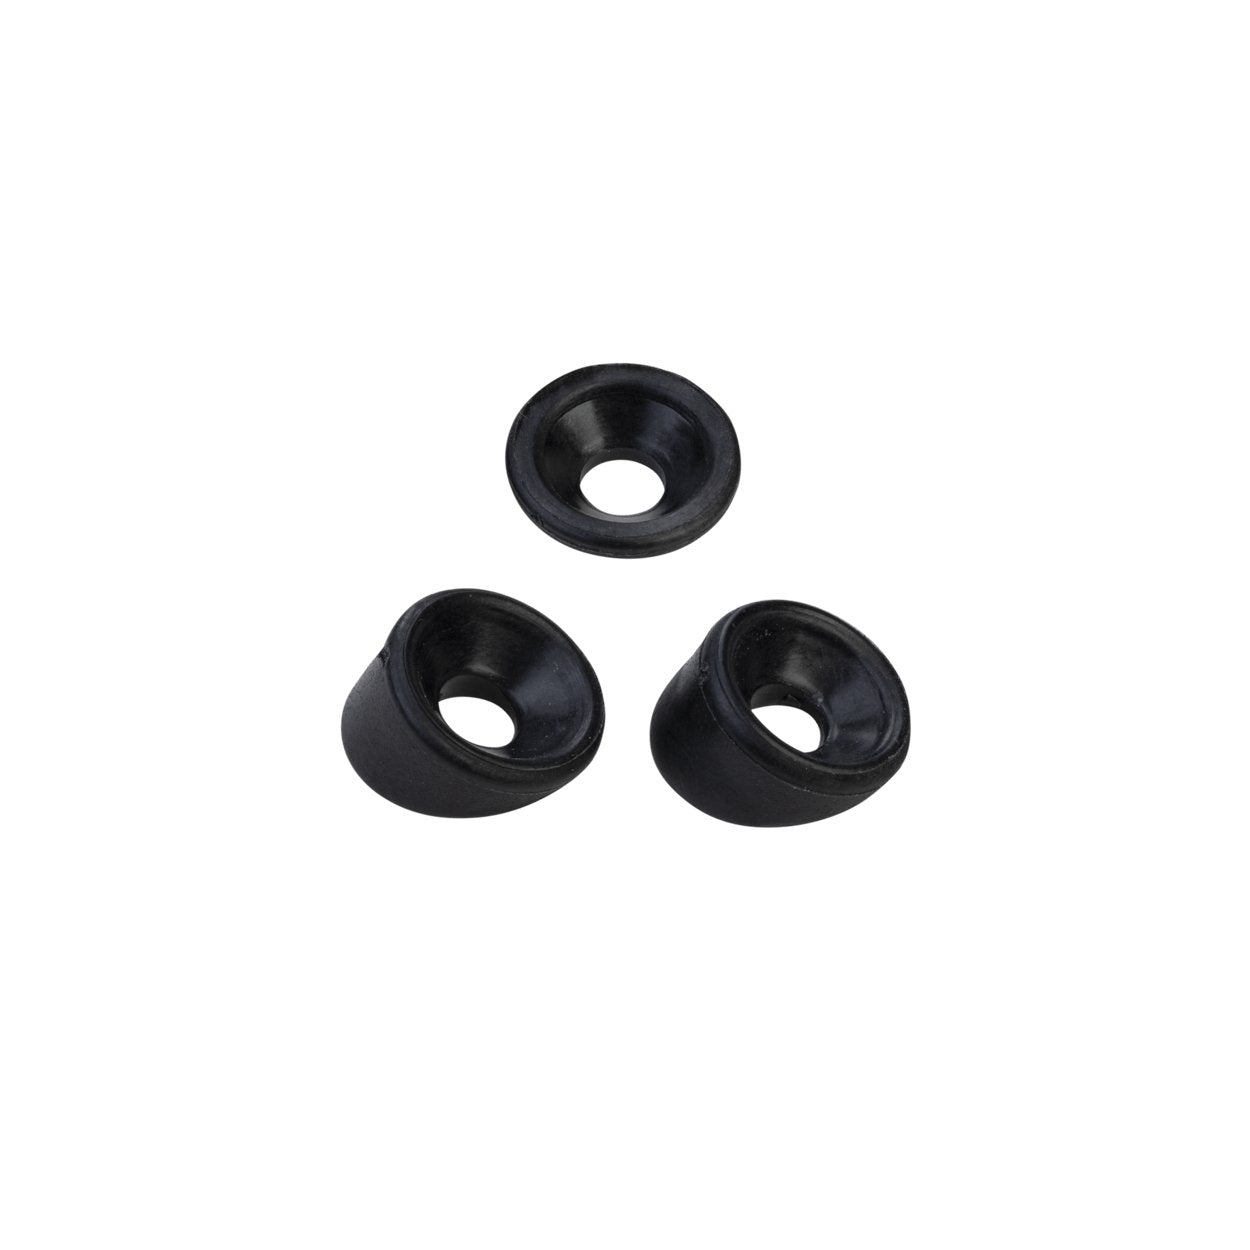 ION Harn.Sp. Washer Set Spectre-Bar (3pcs) (SS21 onwards) 2024 - Worthing Watersports - 9010583182599 - Spareparts - ION Water